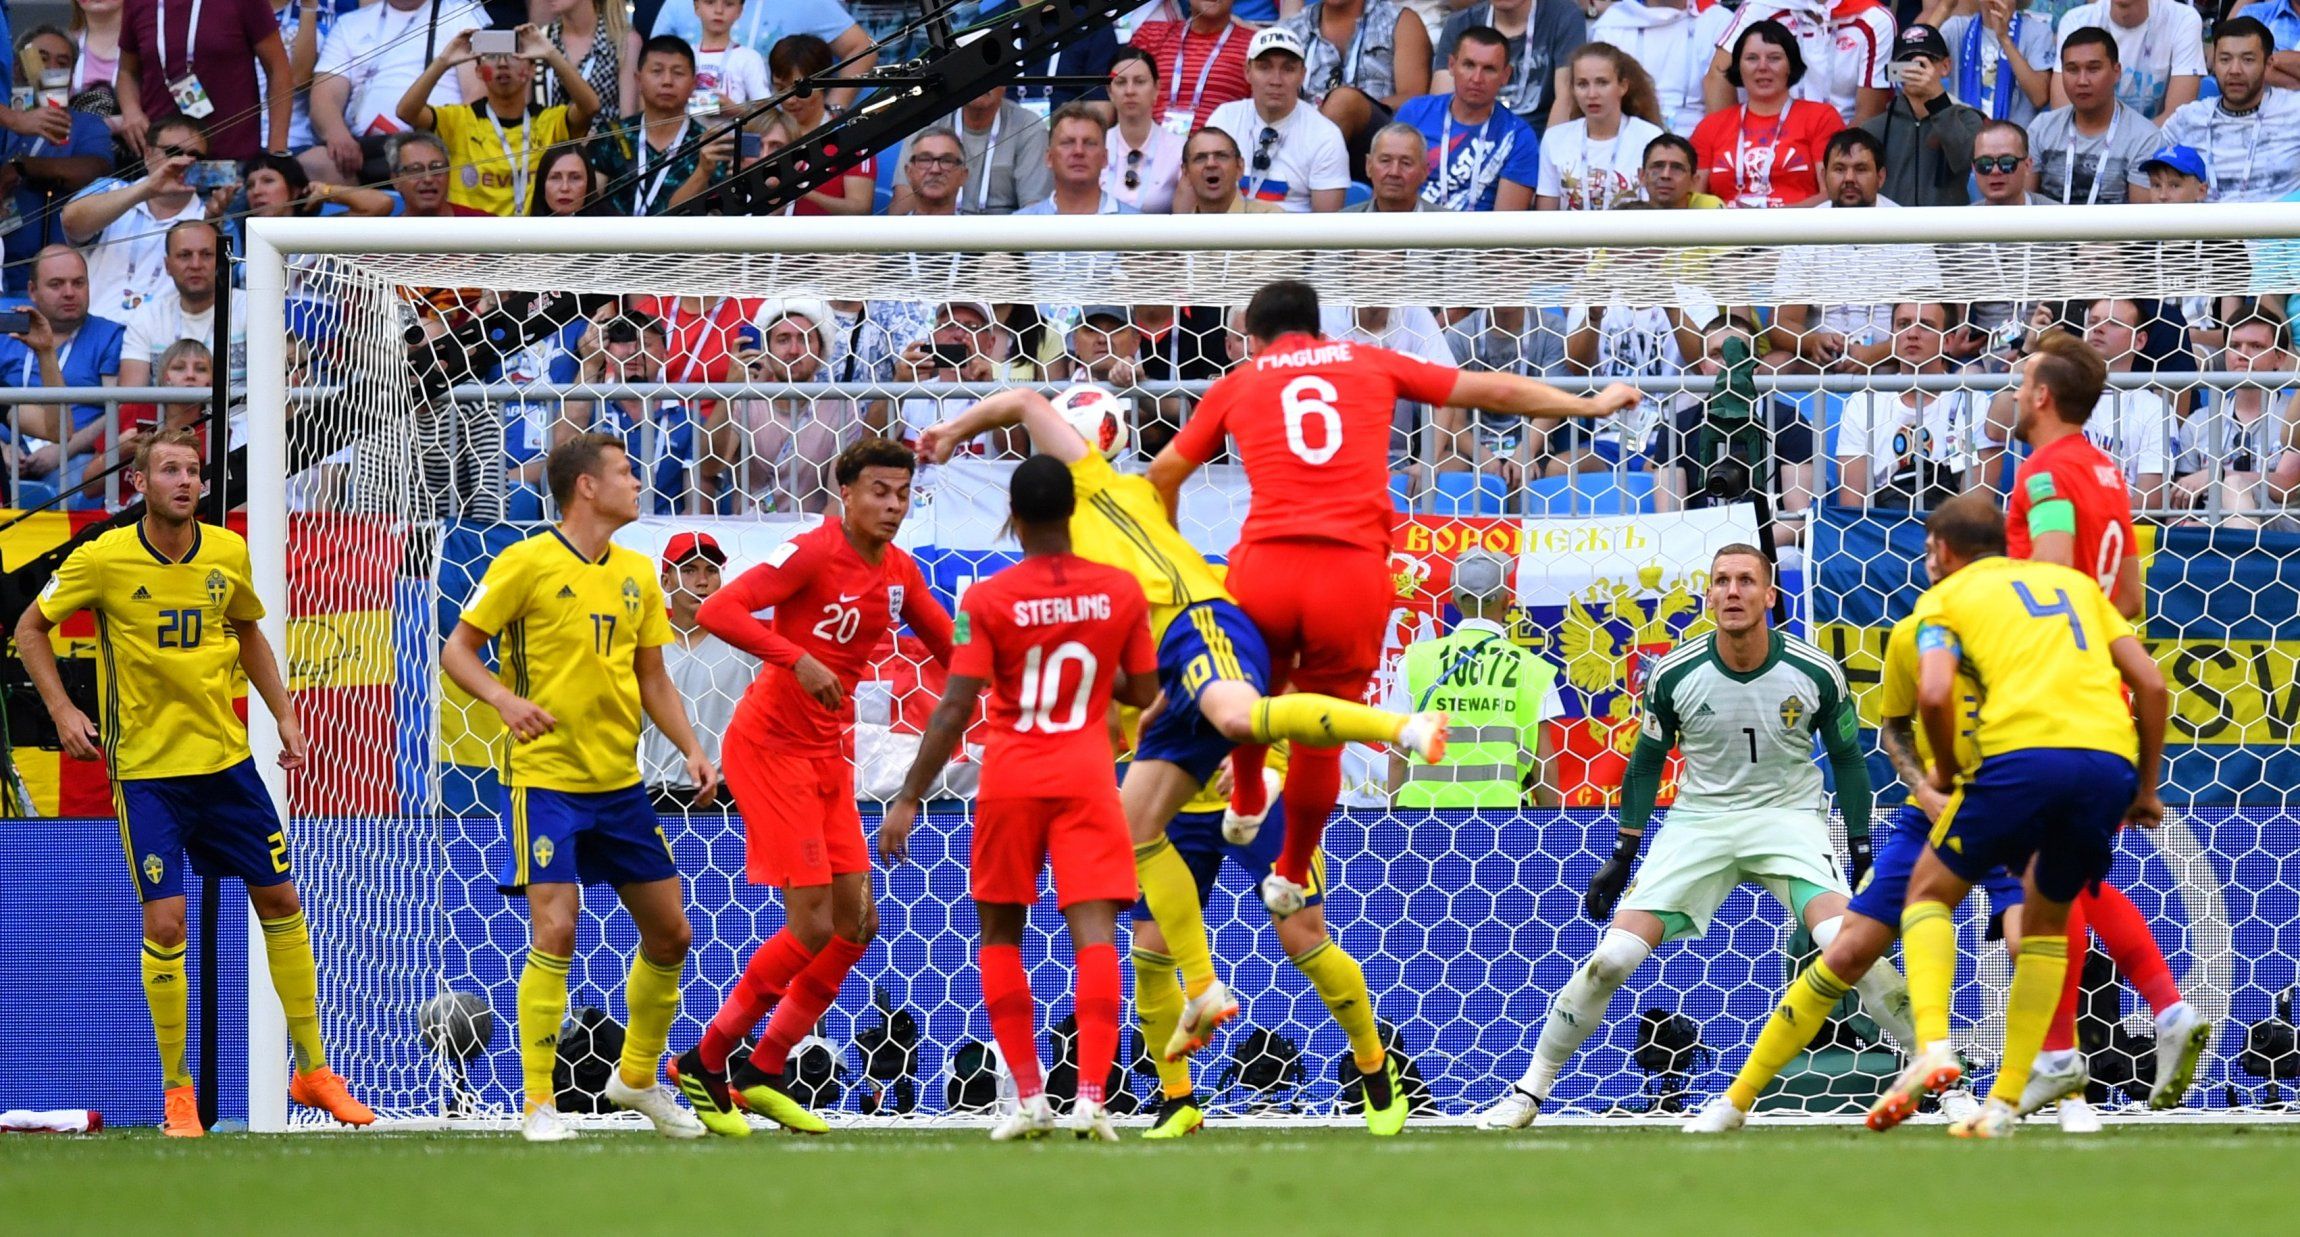 Harry Maguire heads home from a corner against Sweden